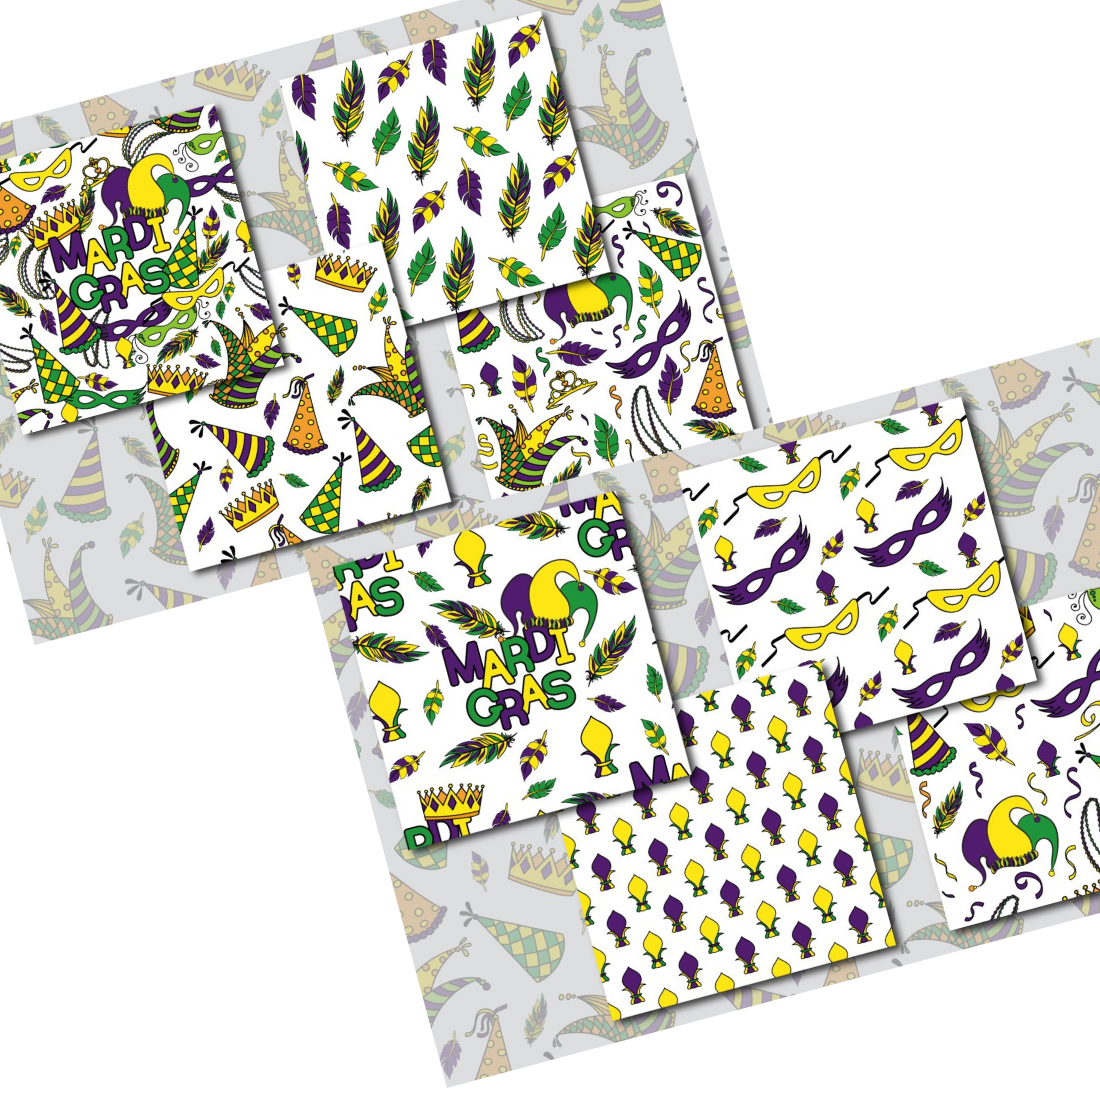 Illustrations of mardi gras patterns collection.